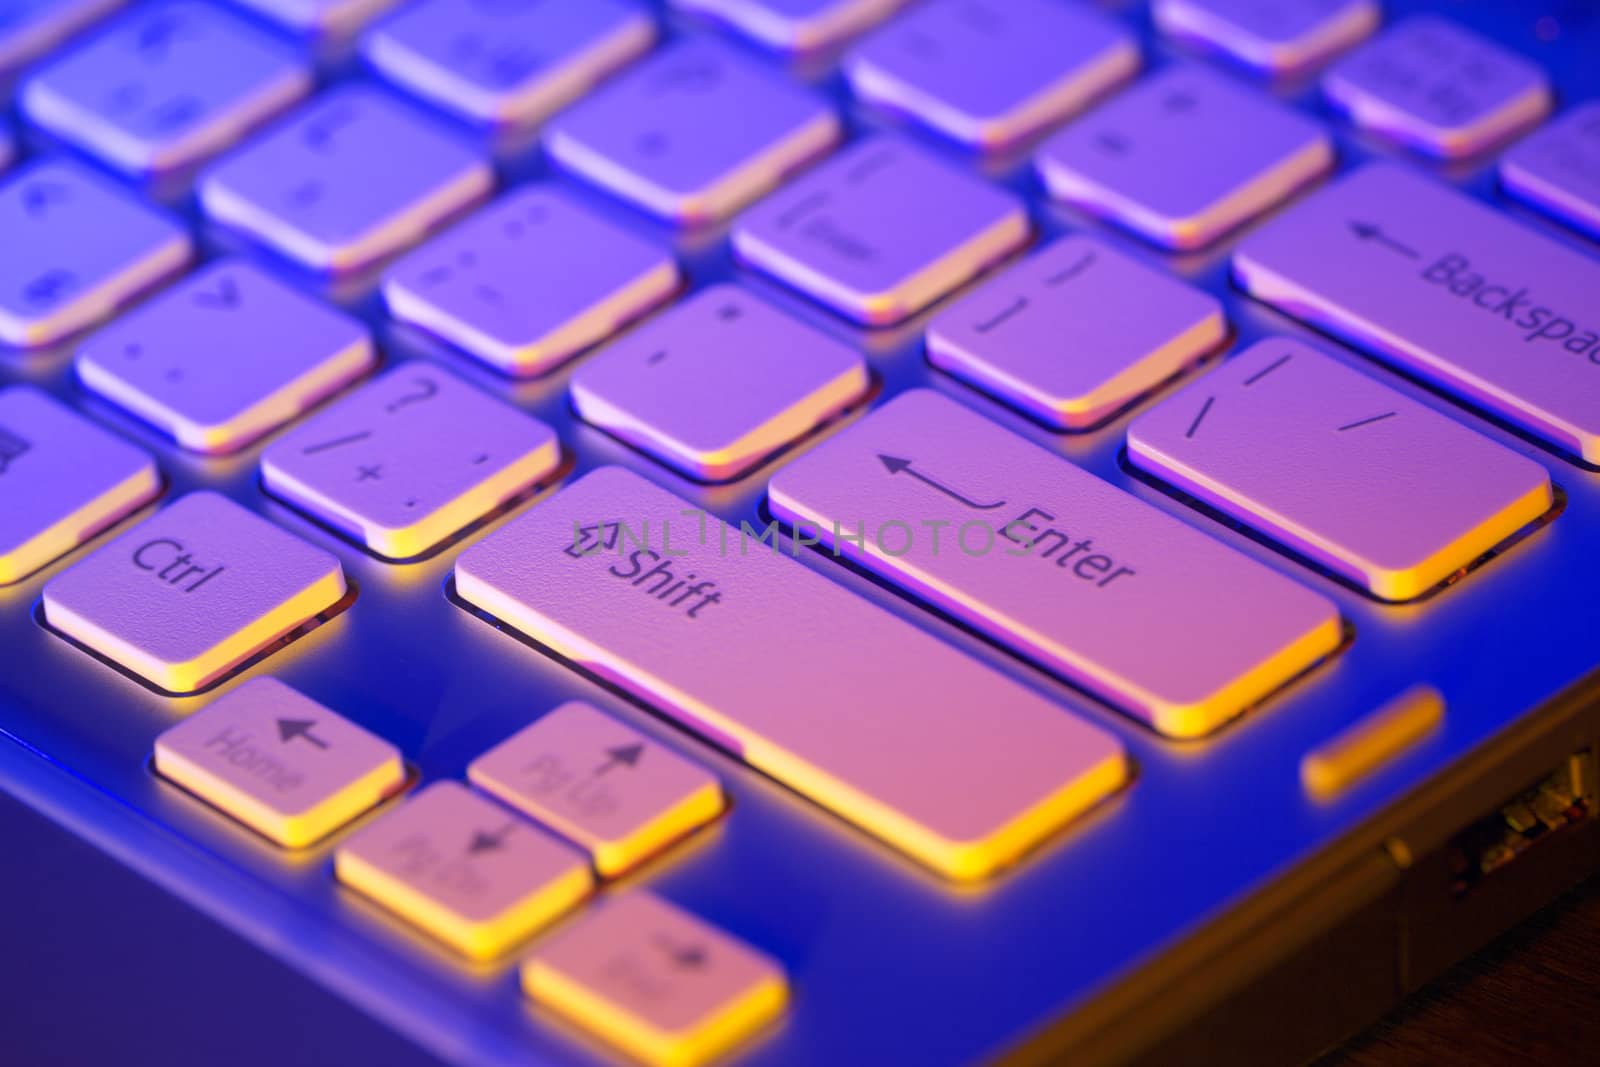 Keyboard modern laptop photographed with the effect of colored illumination